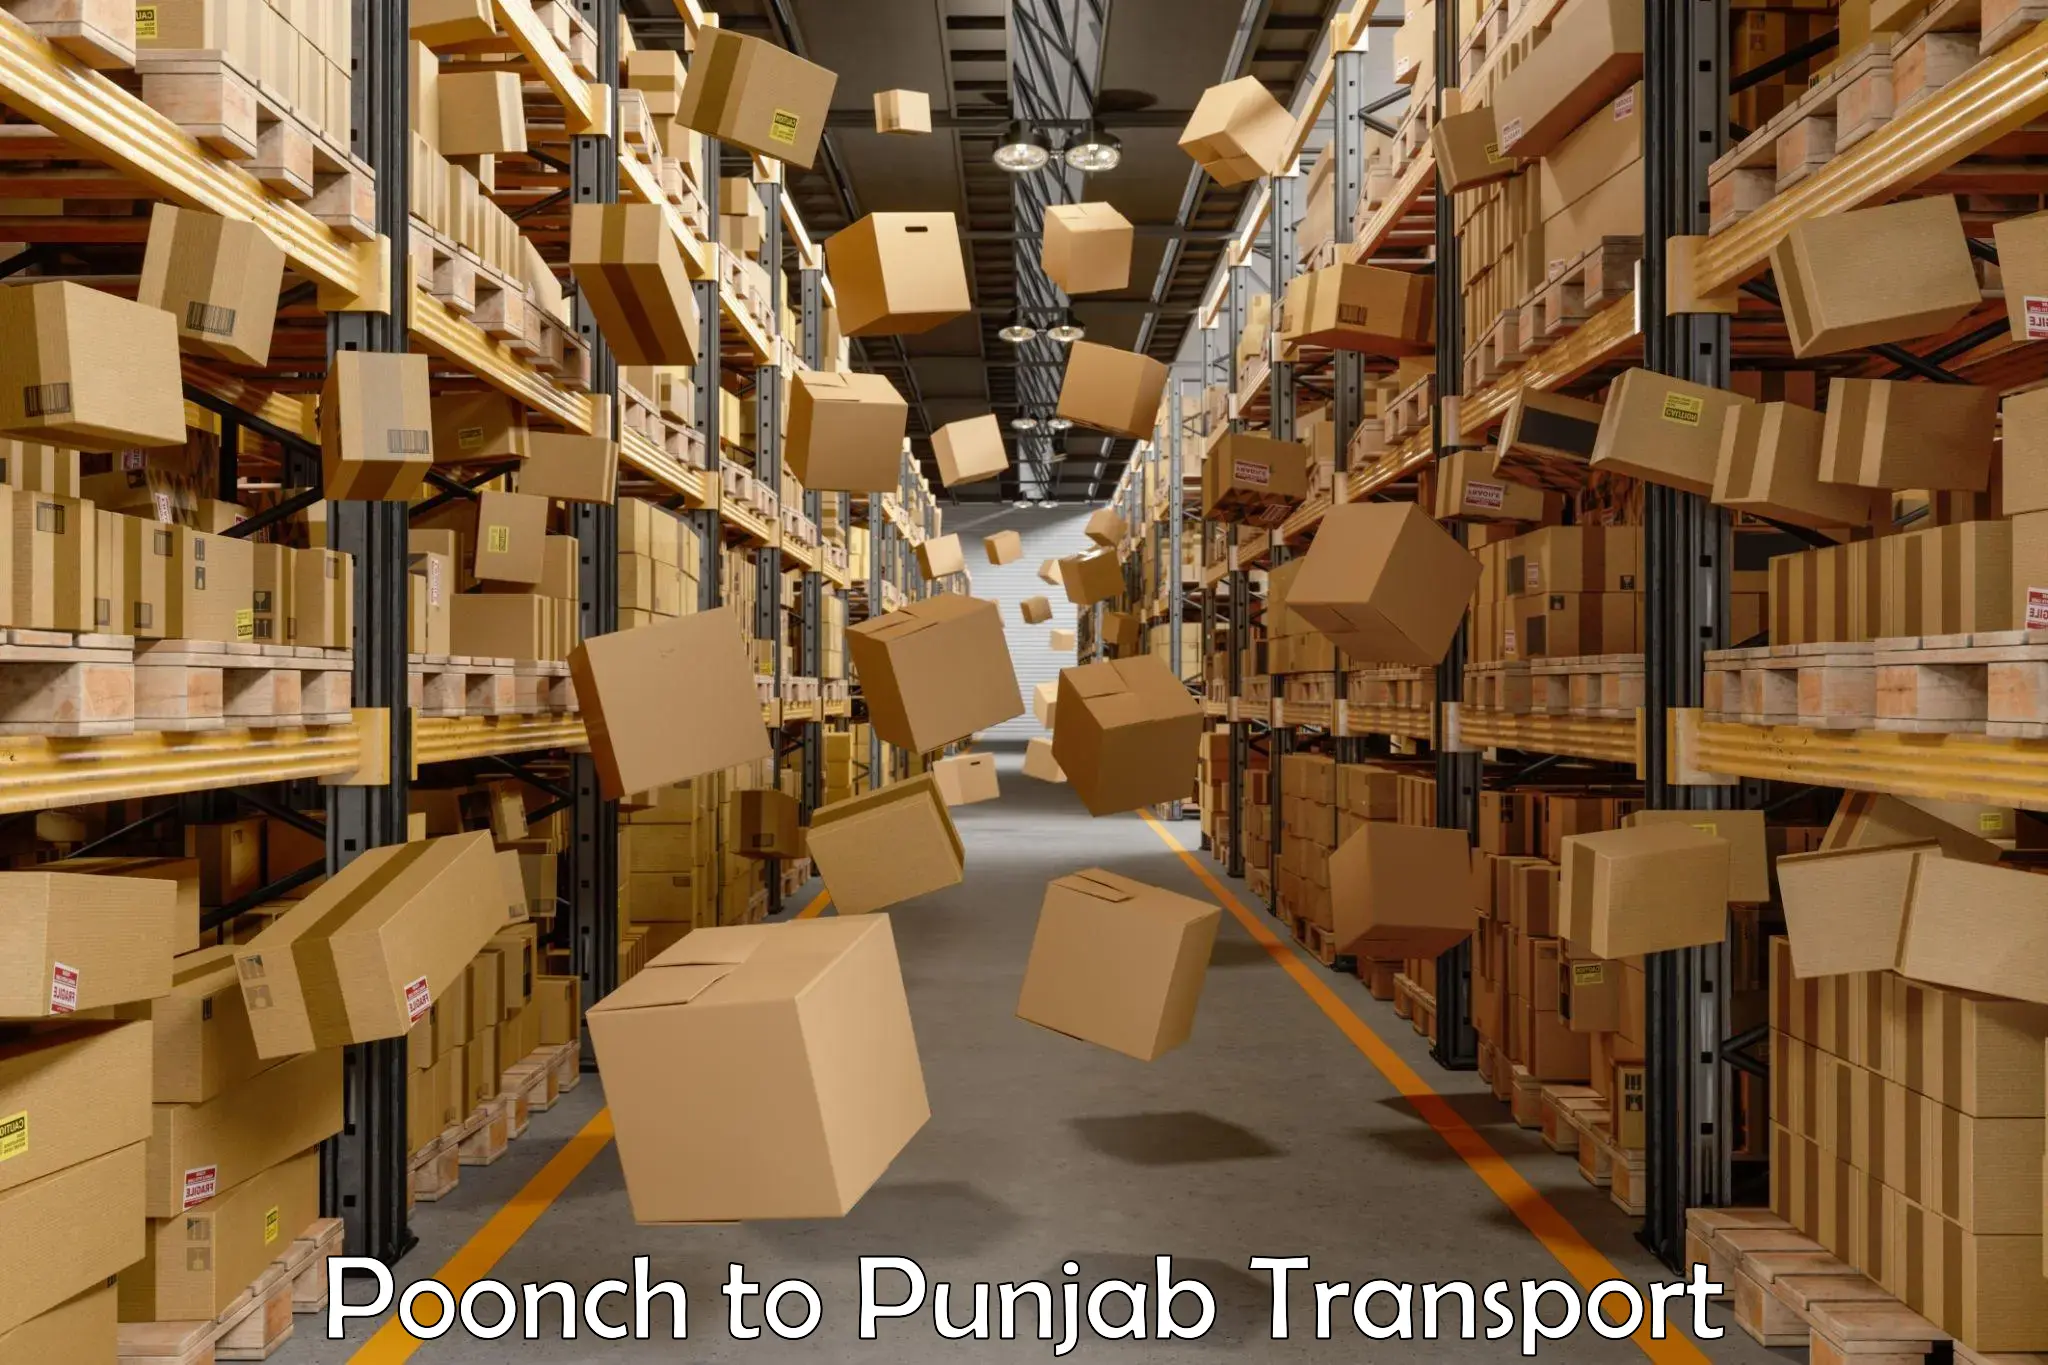 All India transport service Poonch to Pathankot